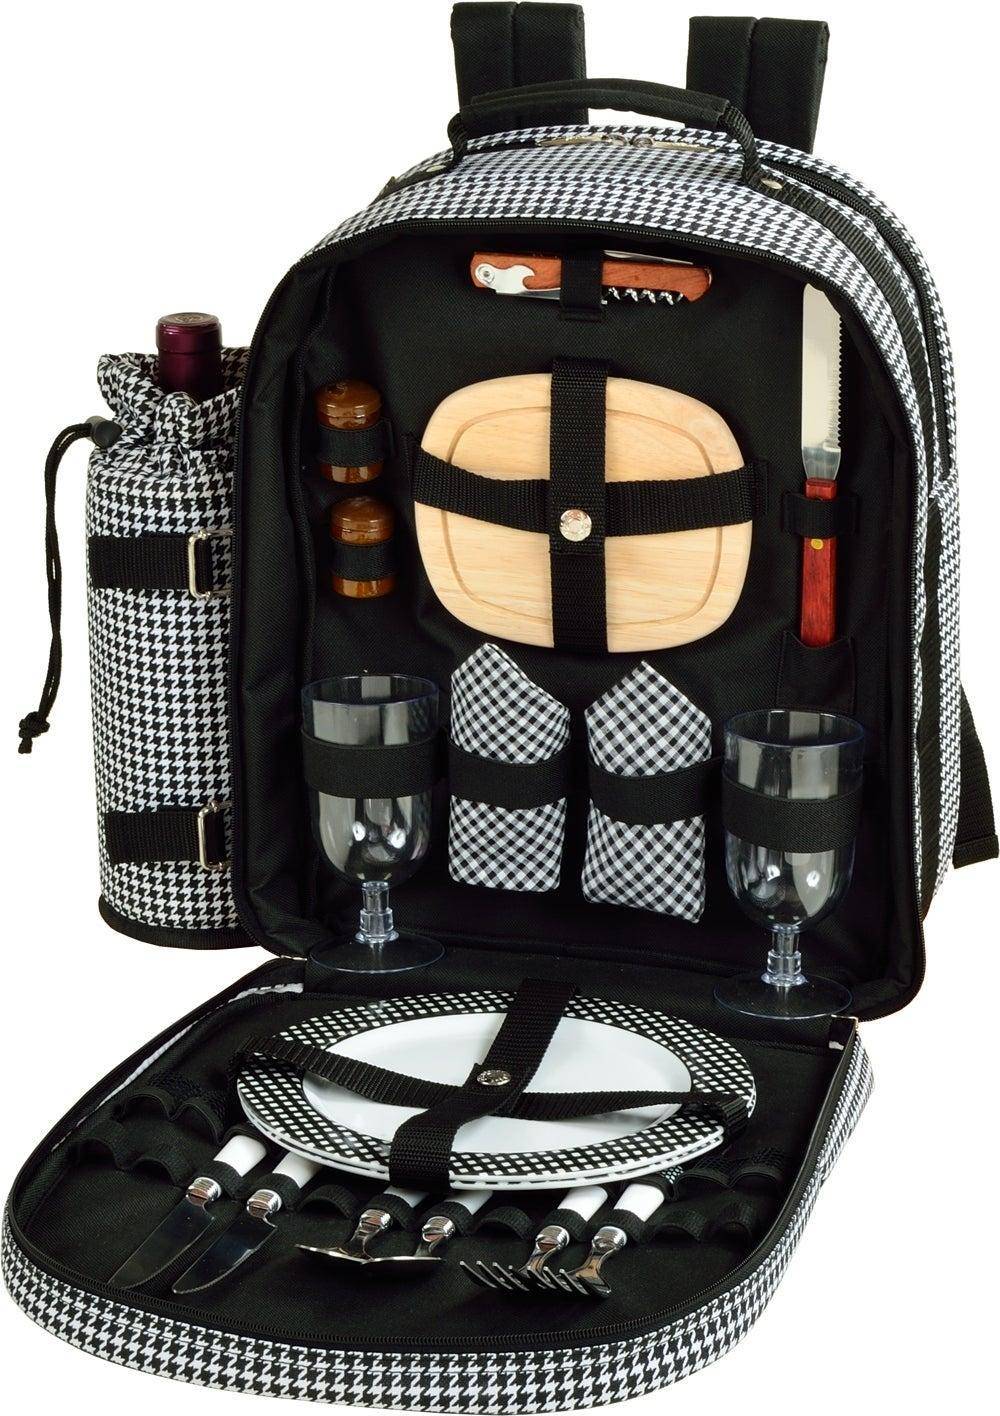 Chevron Blue Picnic at Ascot 080-SCB Deluxe Equipped 2 Person Picnic Backpack with Cooler & Insulated Wine Holder 